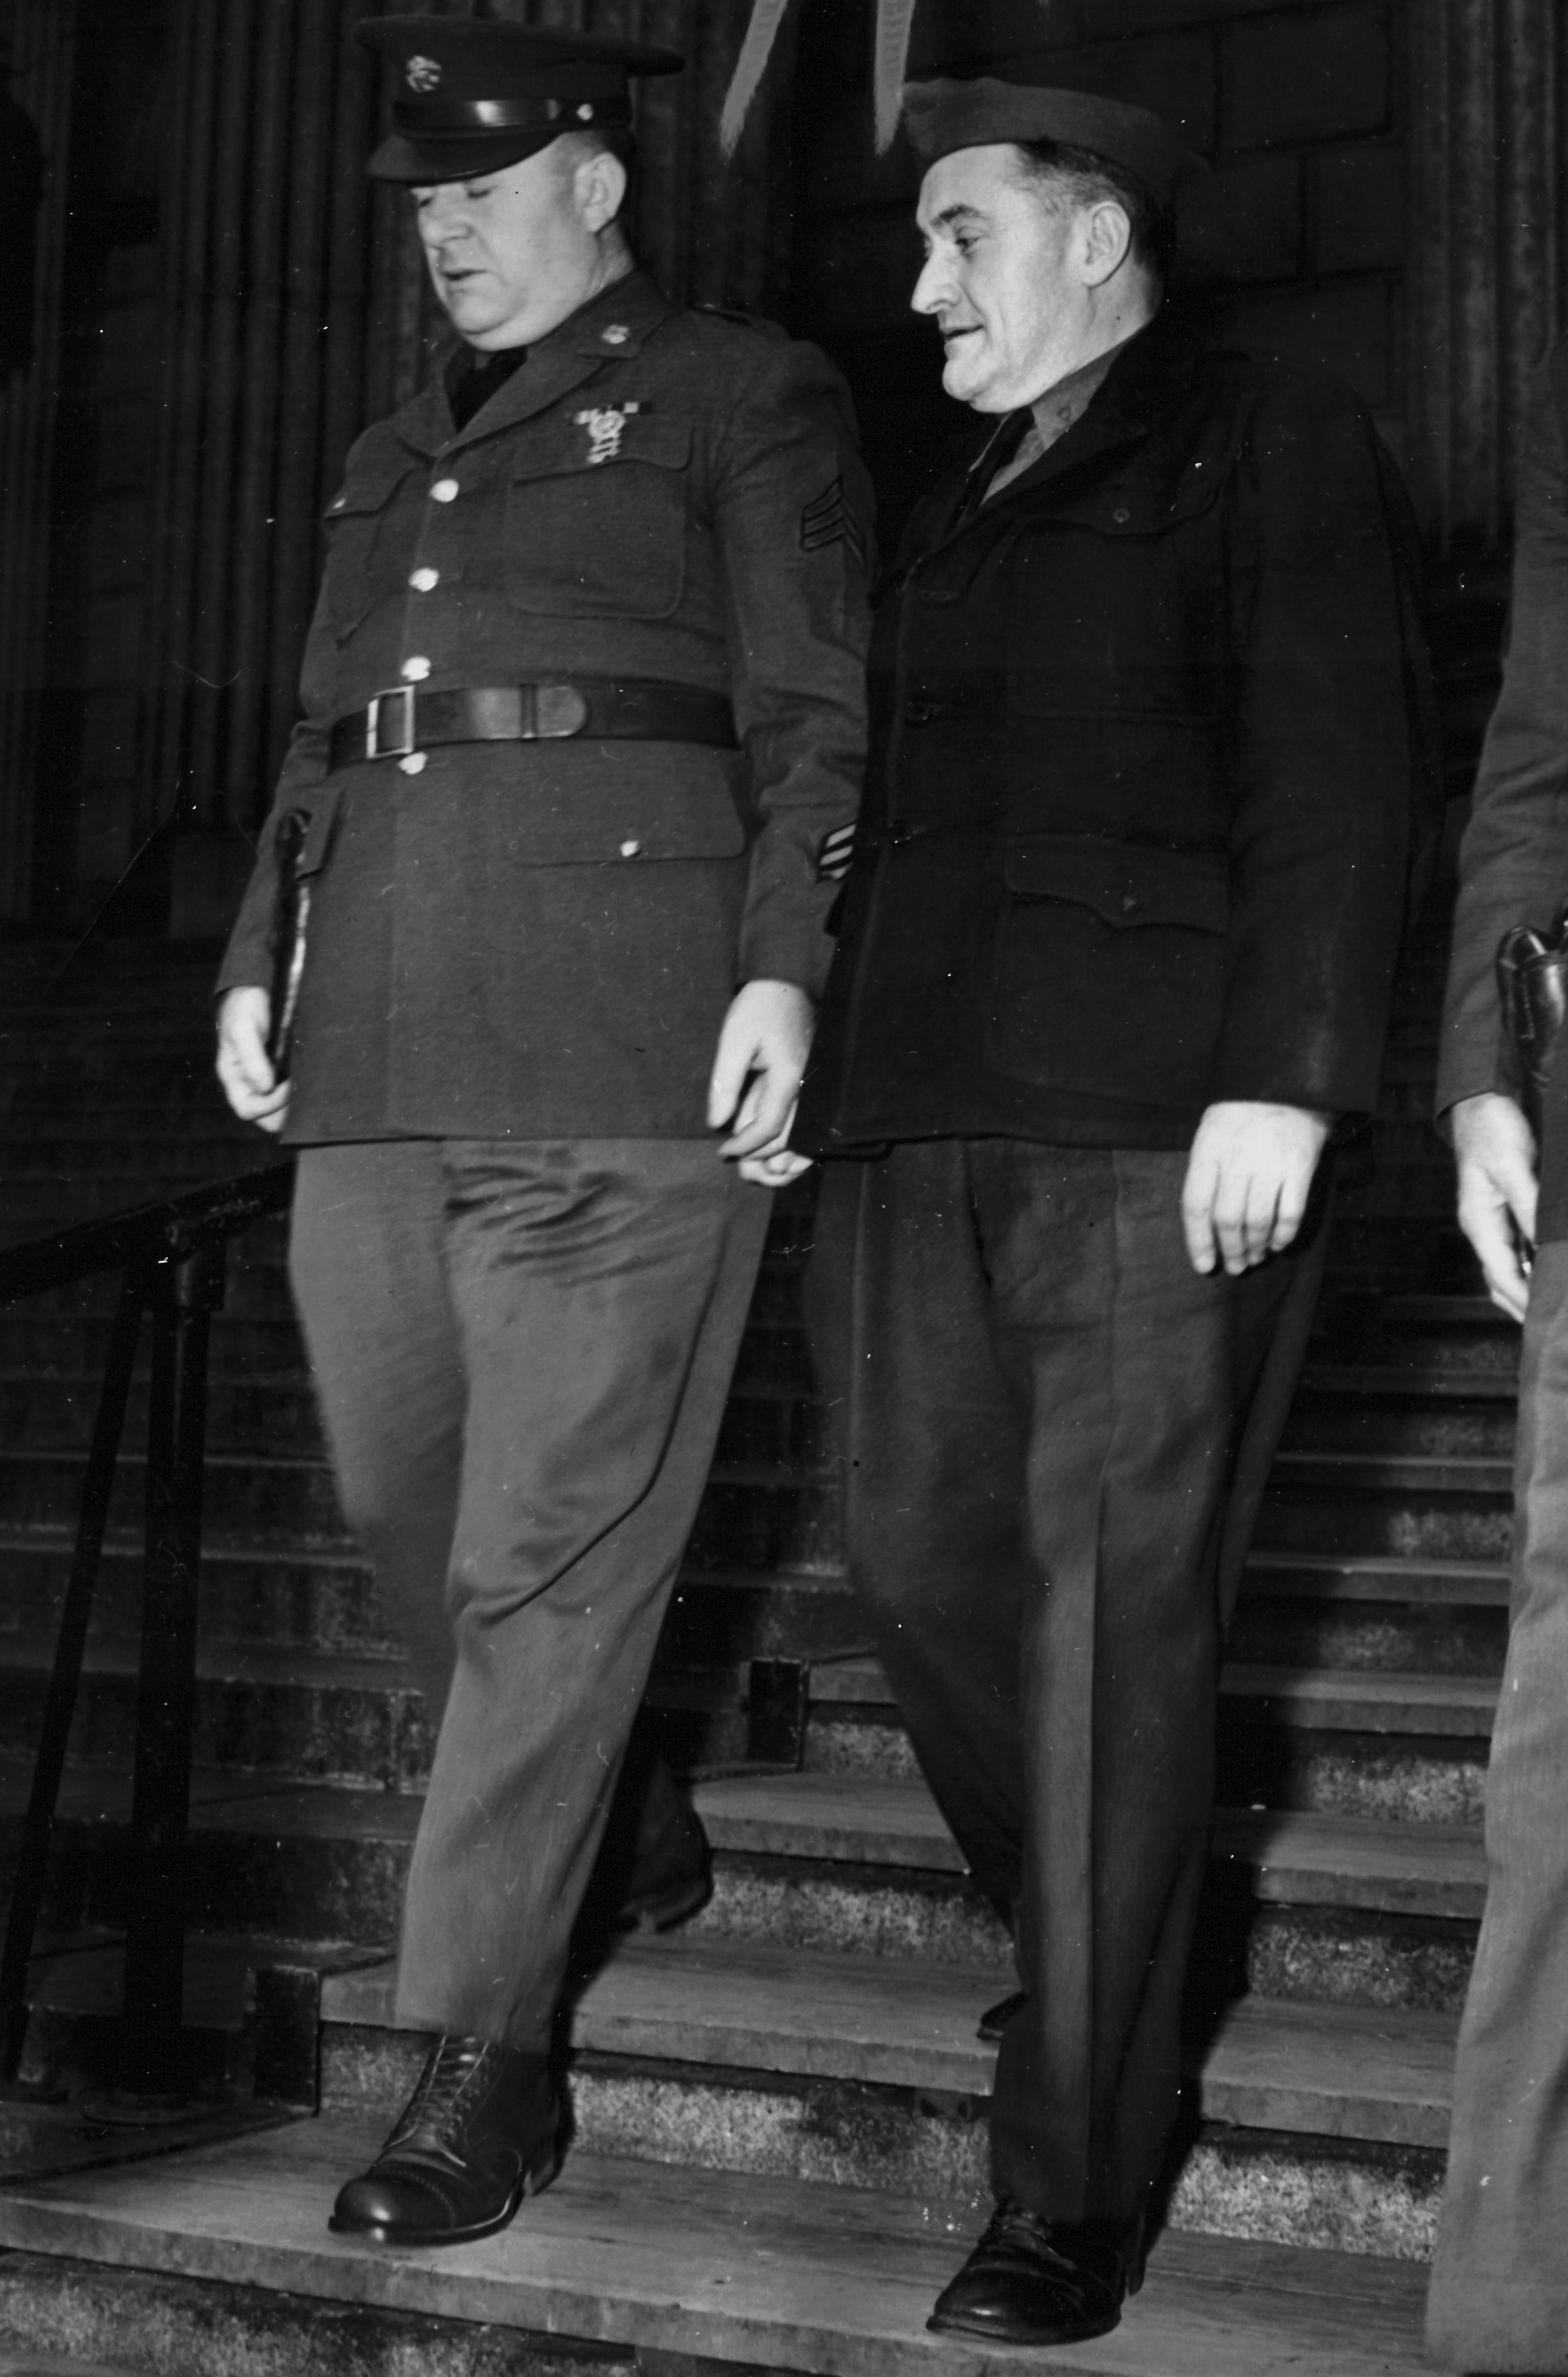 Attorney Harry Weinberger represented Bergdoll
        at this second trial by courts-martial. After the
        proceedings were over, Weinberger sued Bergdoll
        for failing to pay him his $75,000 legal fee. In this
        15 April 1940 photograph, Bergdoll (right, in dark
        coat) leaves the Supreme Court in New York City,
        where he had appeared to answer Weinberger’s
        lawsuit. (Photo courtesy of author)